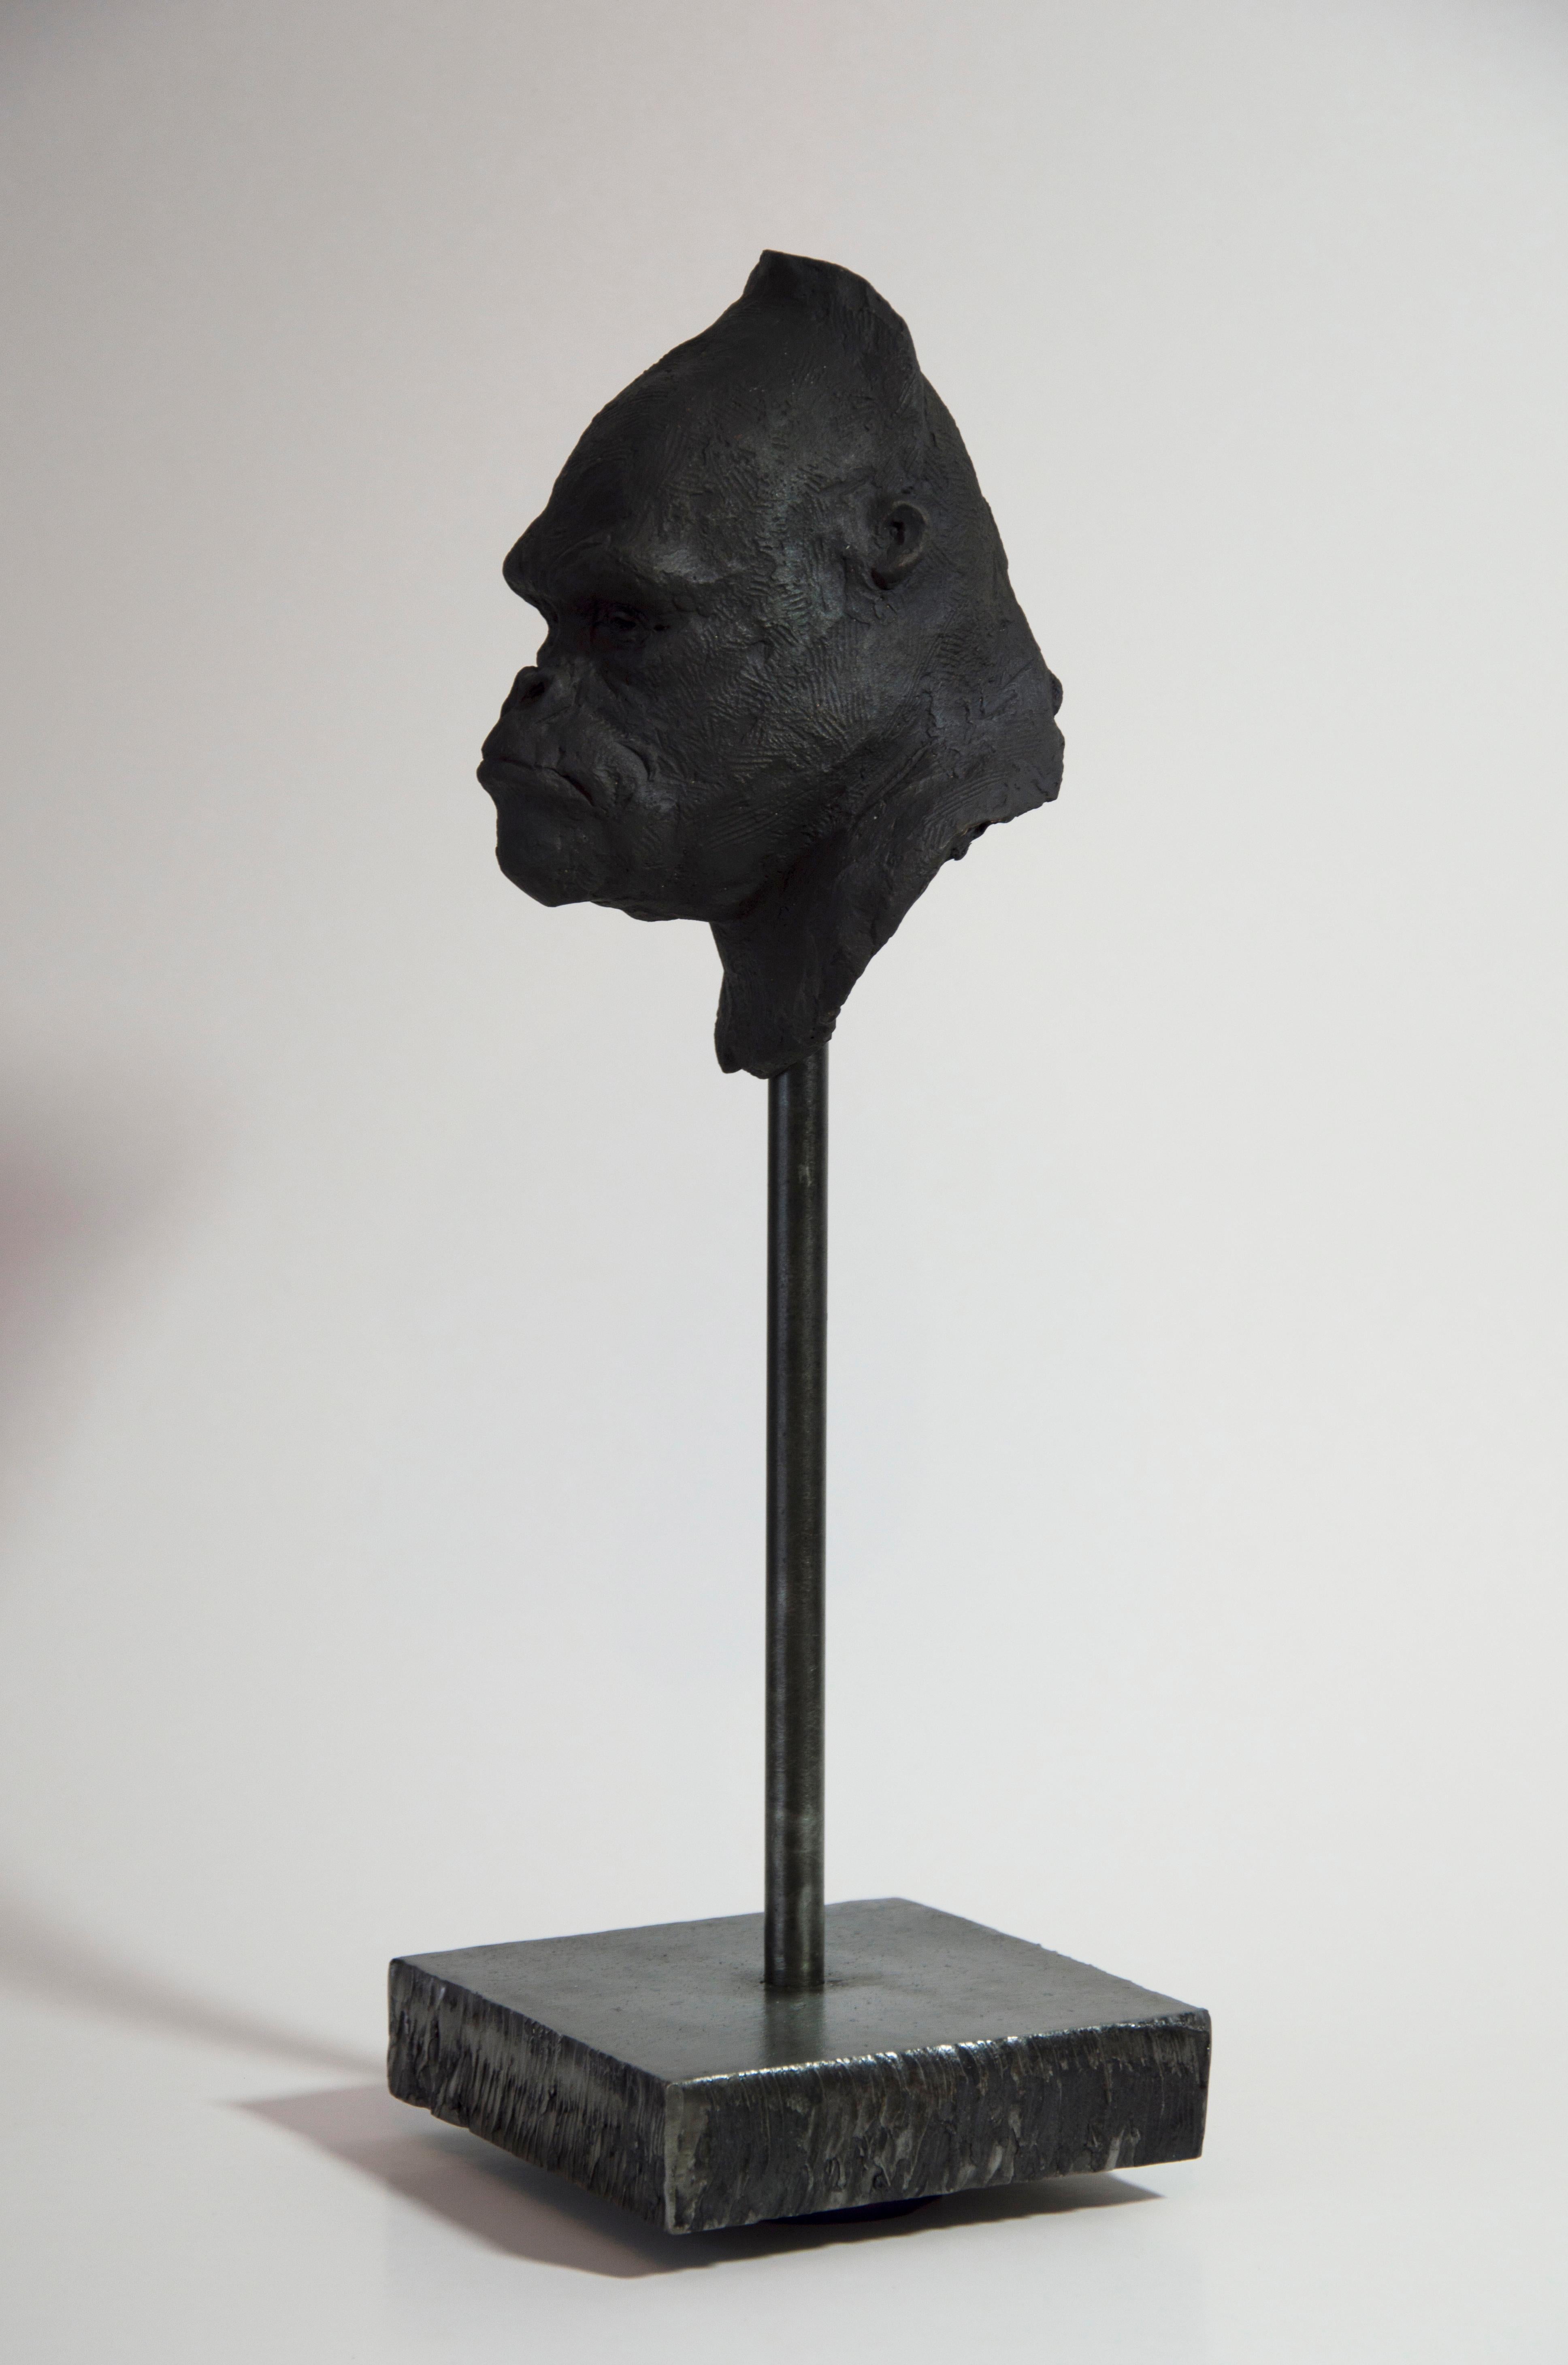 Handmade bronze sculpture, patinated, signed,  weight of the sculpture including the base 5,5kg
Material Head: Bronze,  Base of the sculpture: raw, painted steel
Limited Edition 1/5

Tomasz Bielak born in Lublin in 1967. He graduated  of The Academy